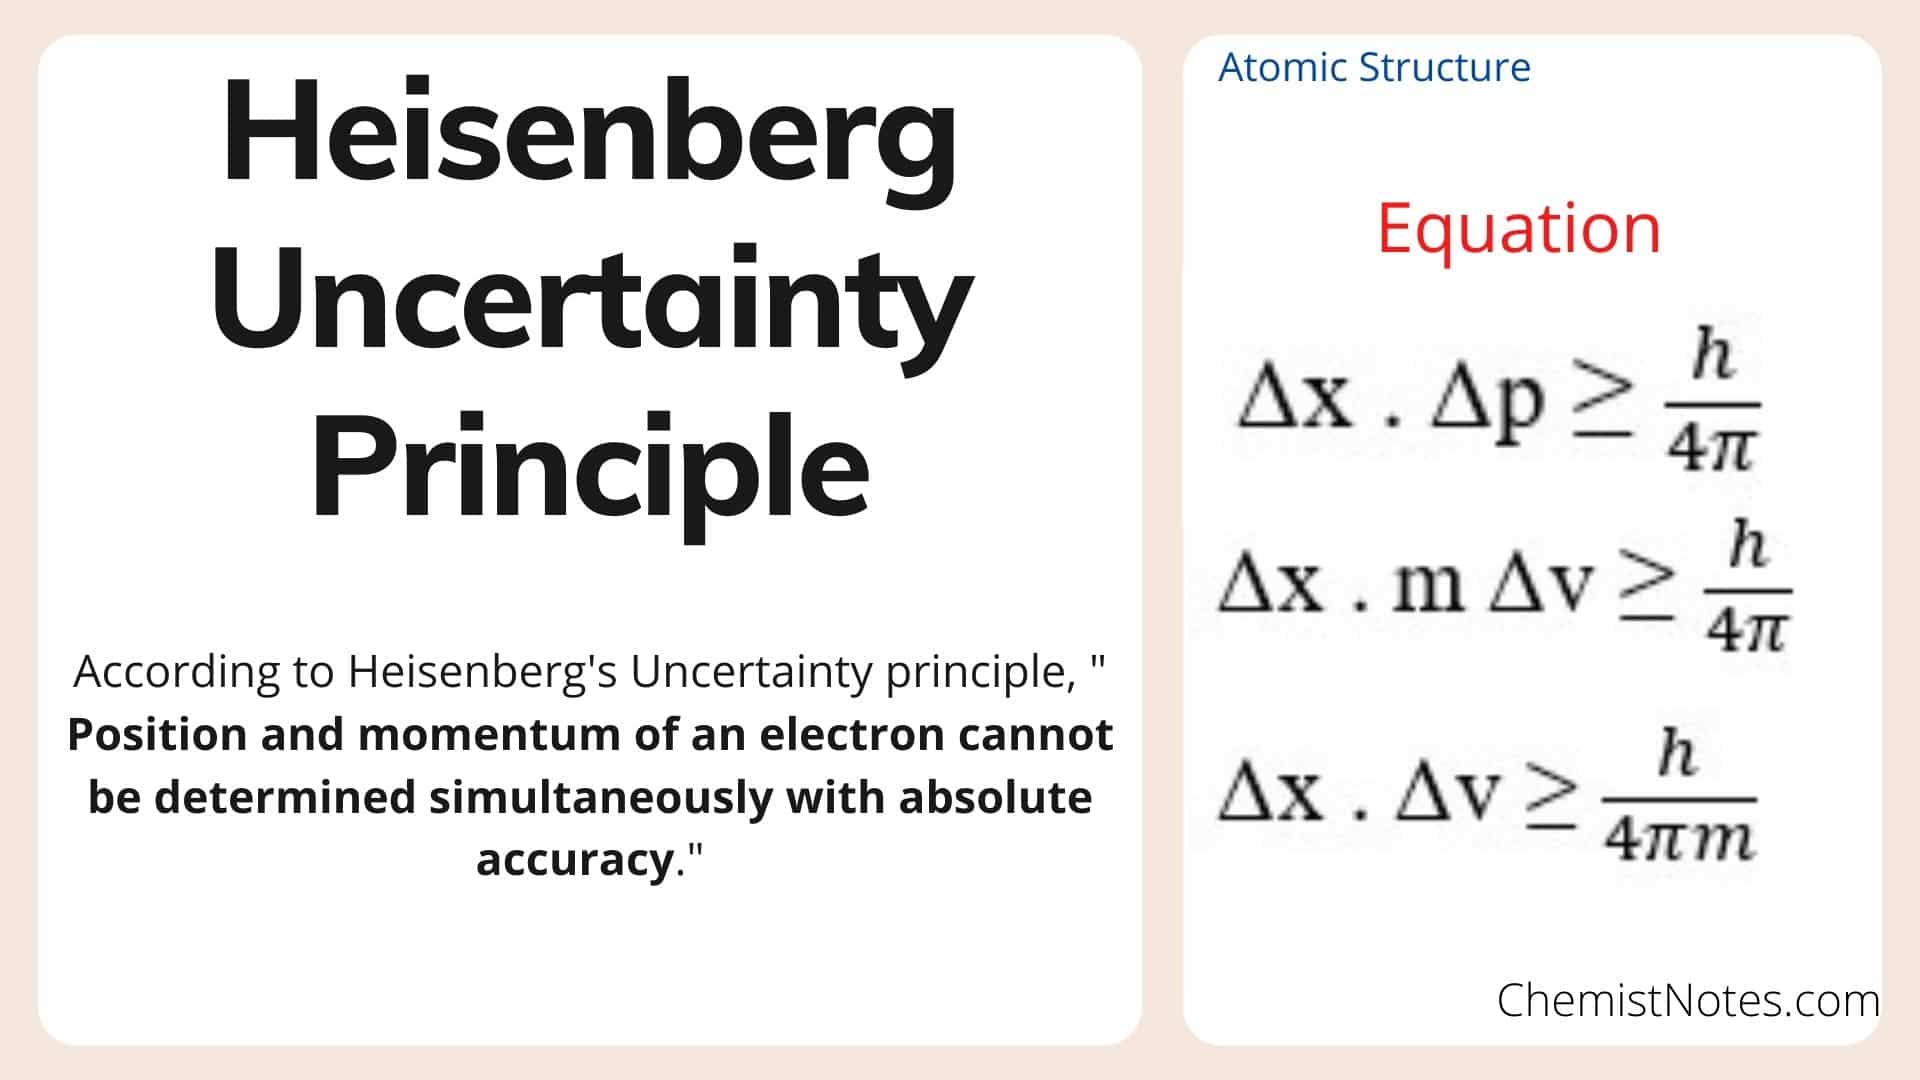 Heisenberg Uncertainty Principle Definition, Equation, and Application